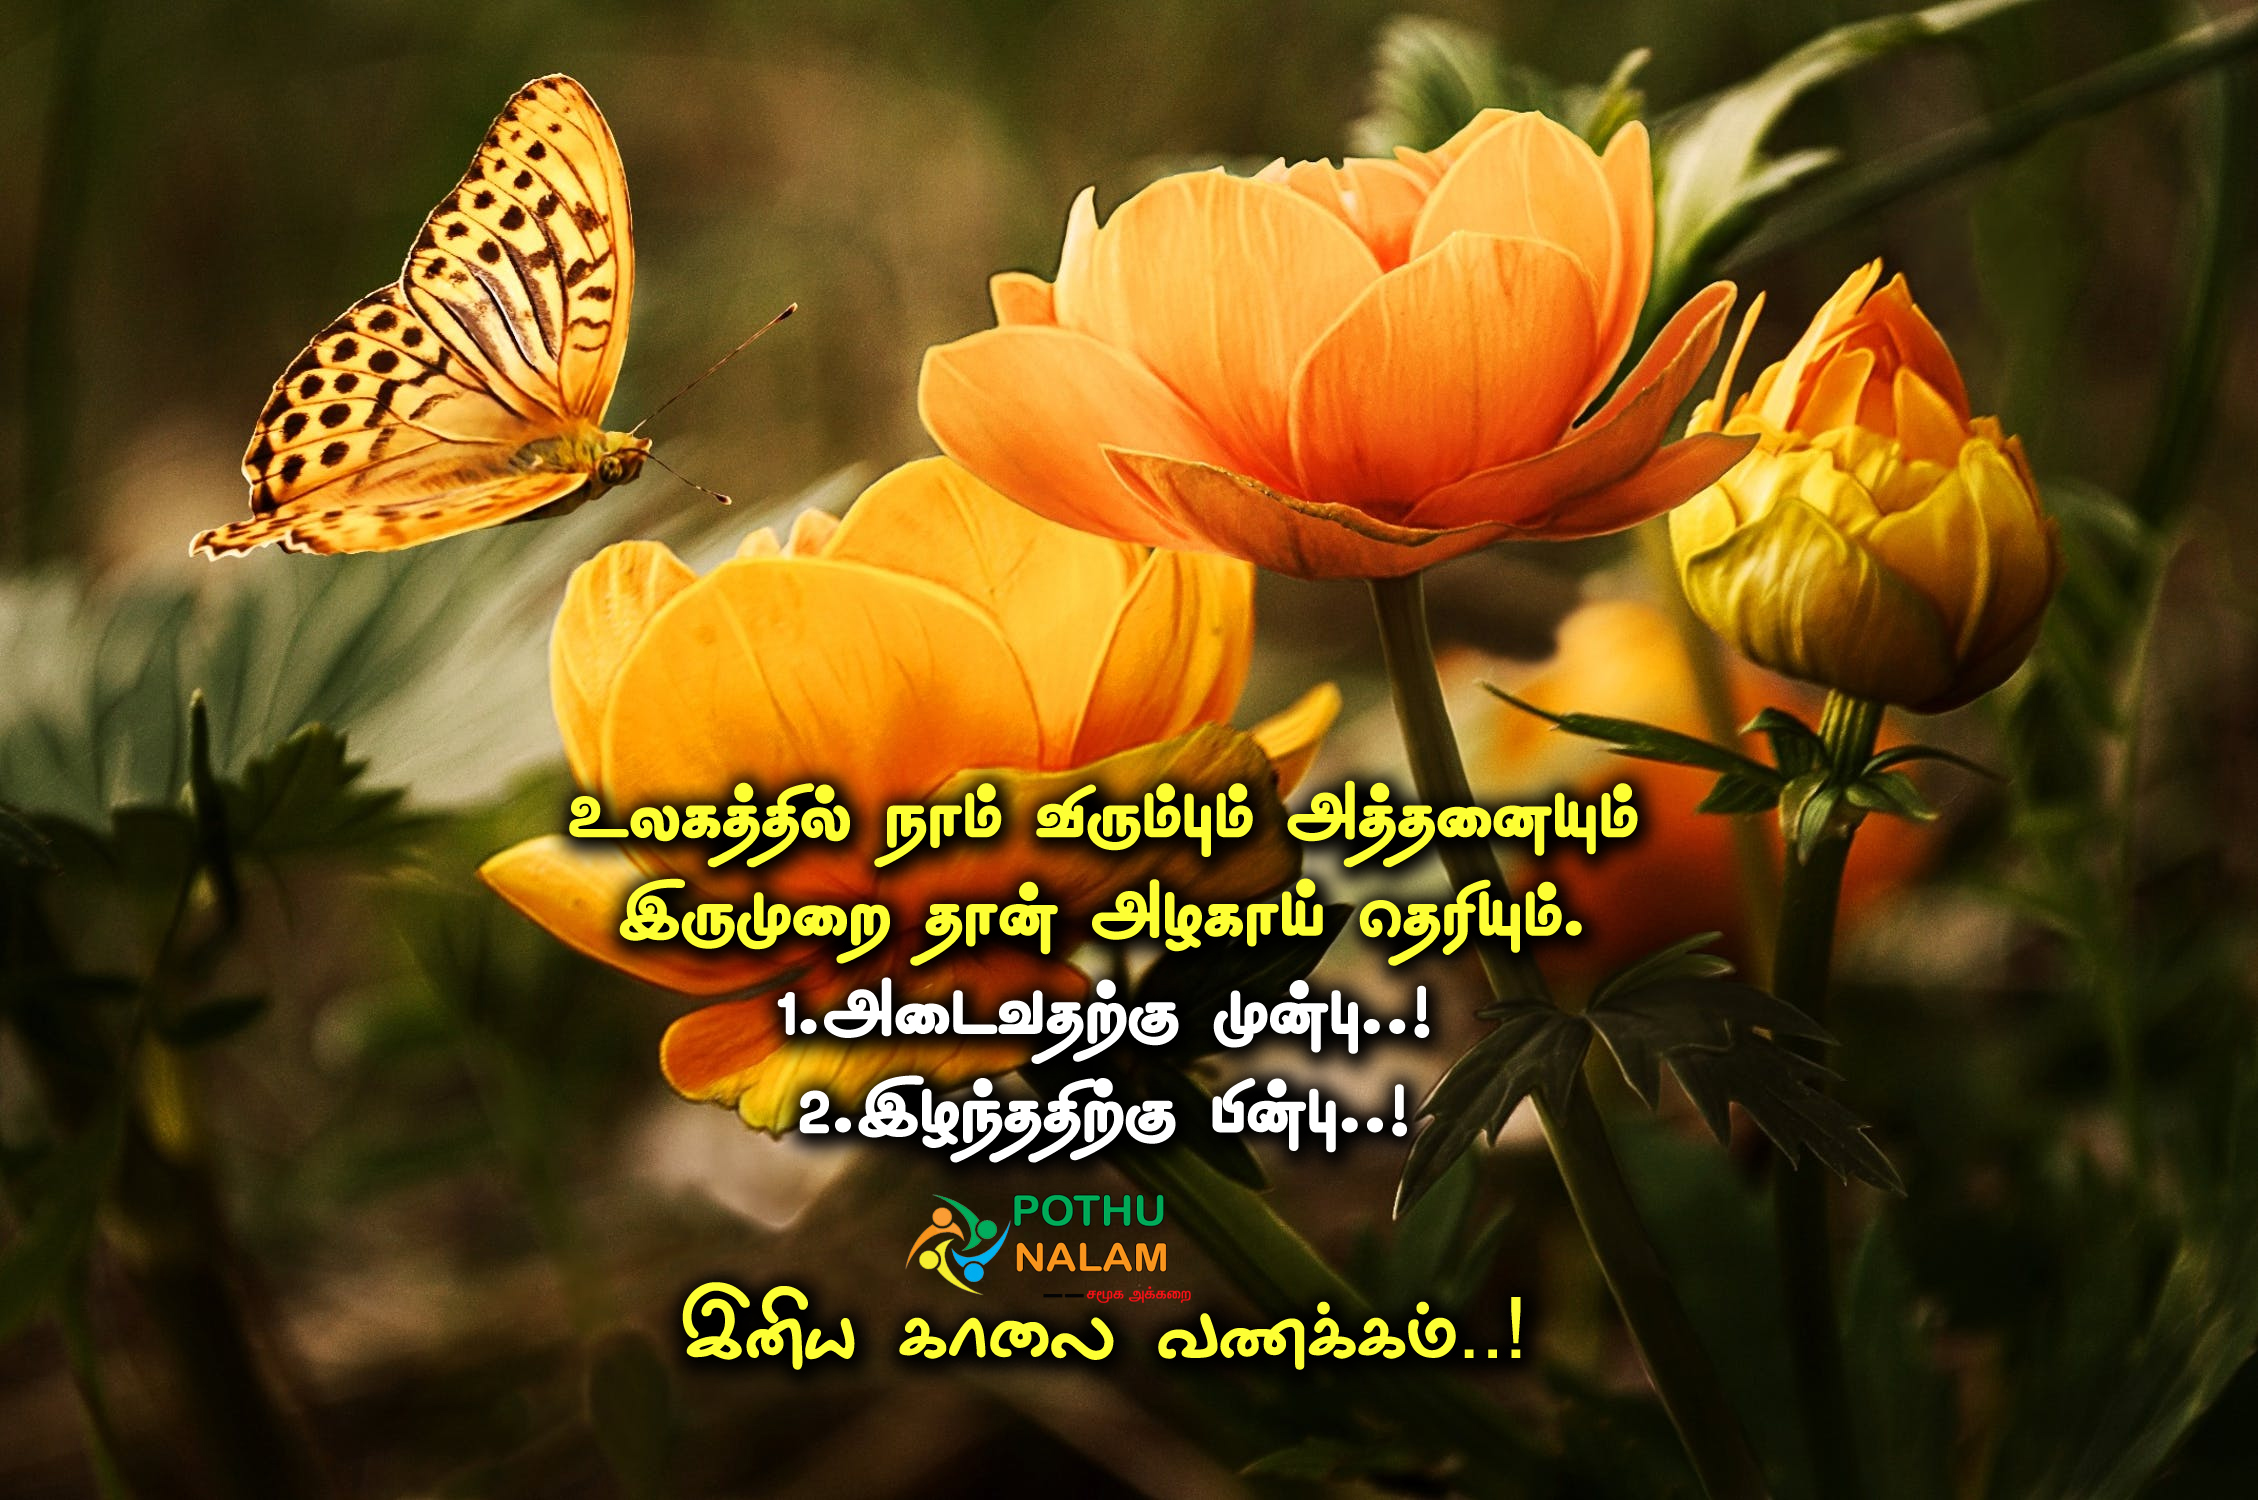 Sunday Good Morning Images in Tamil 